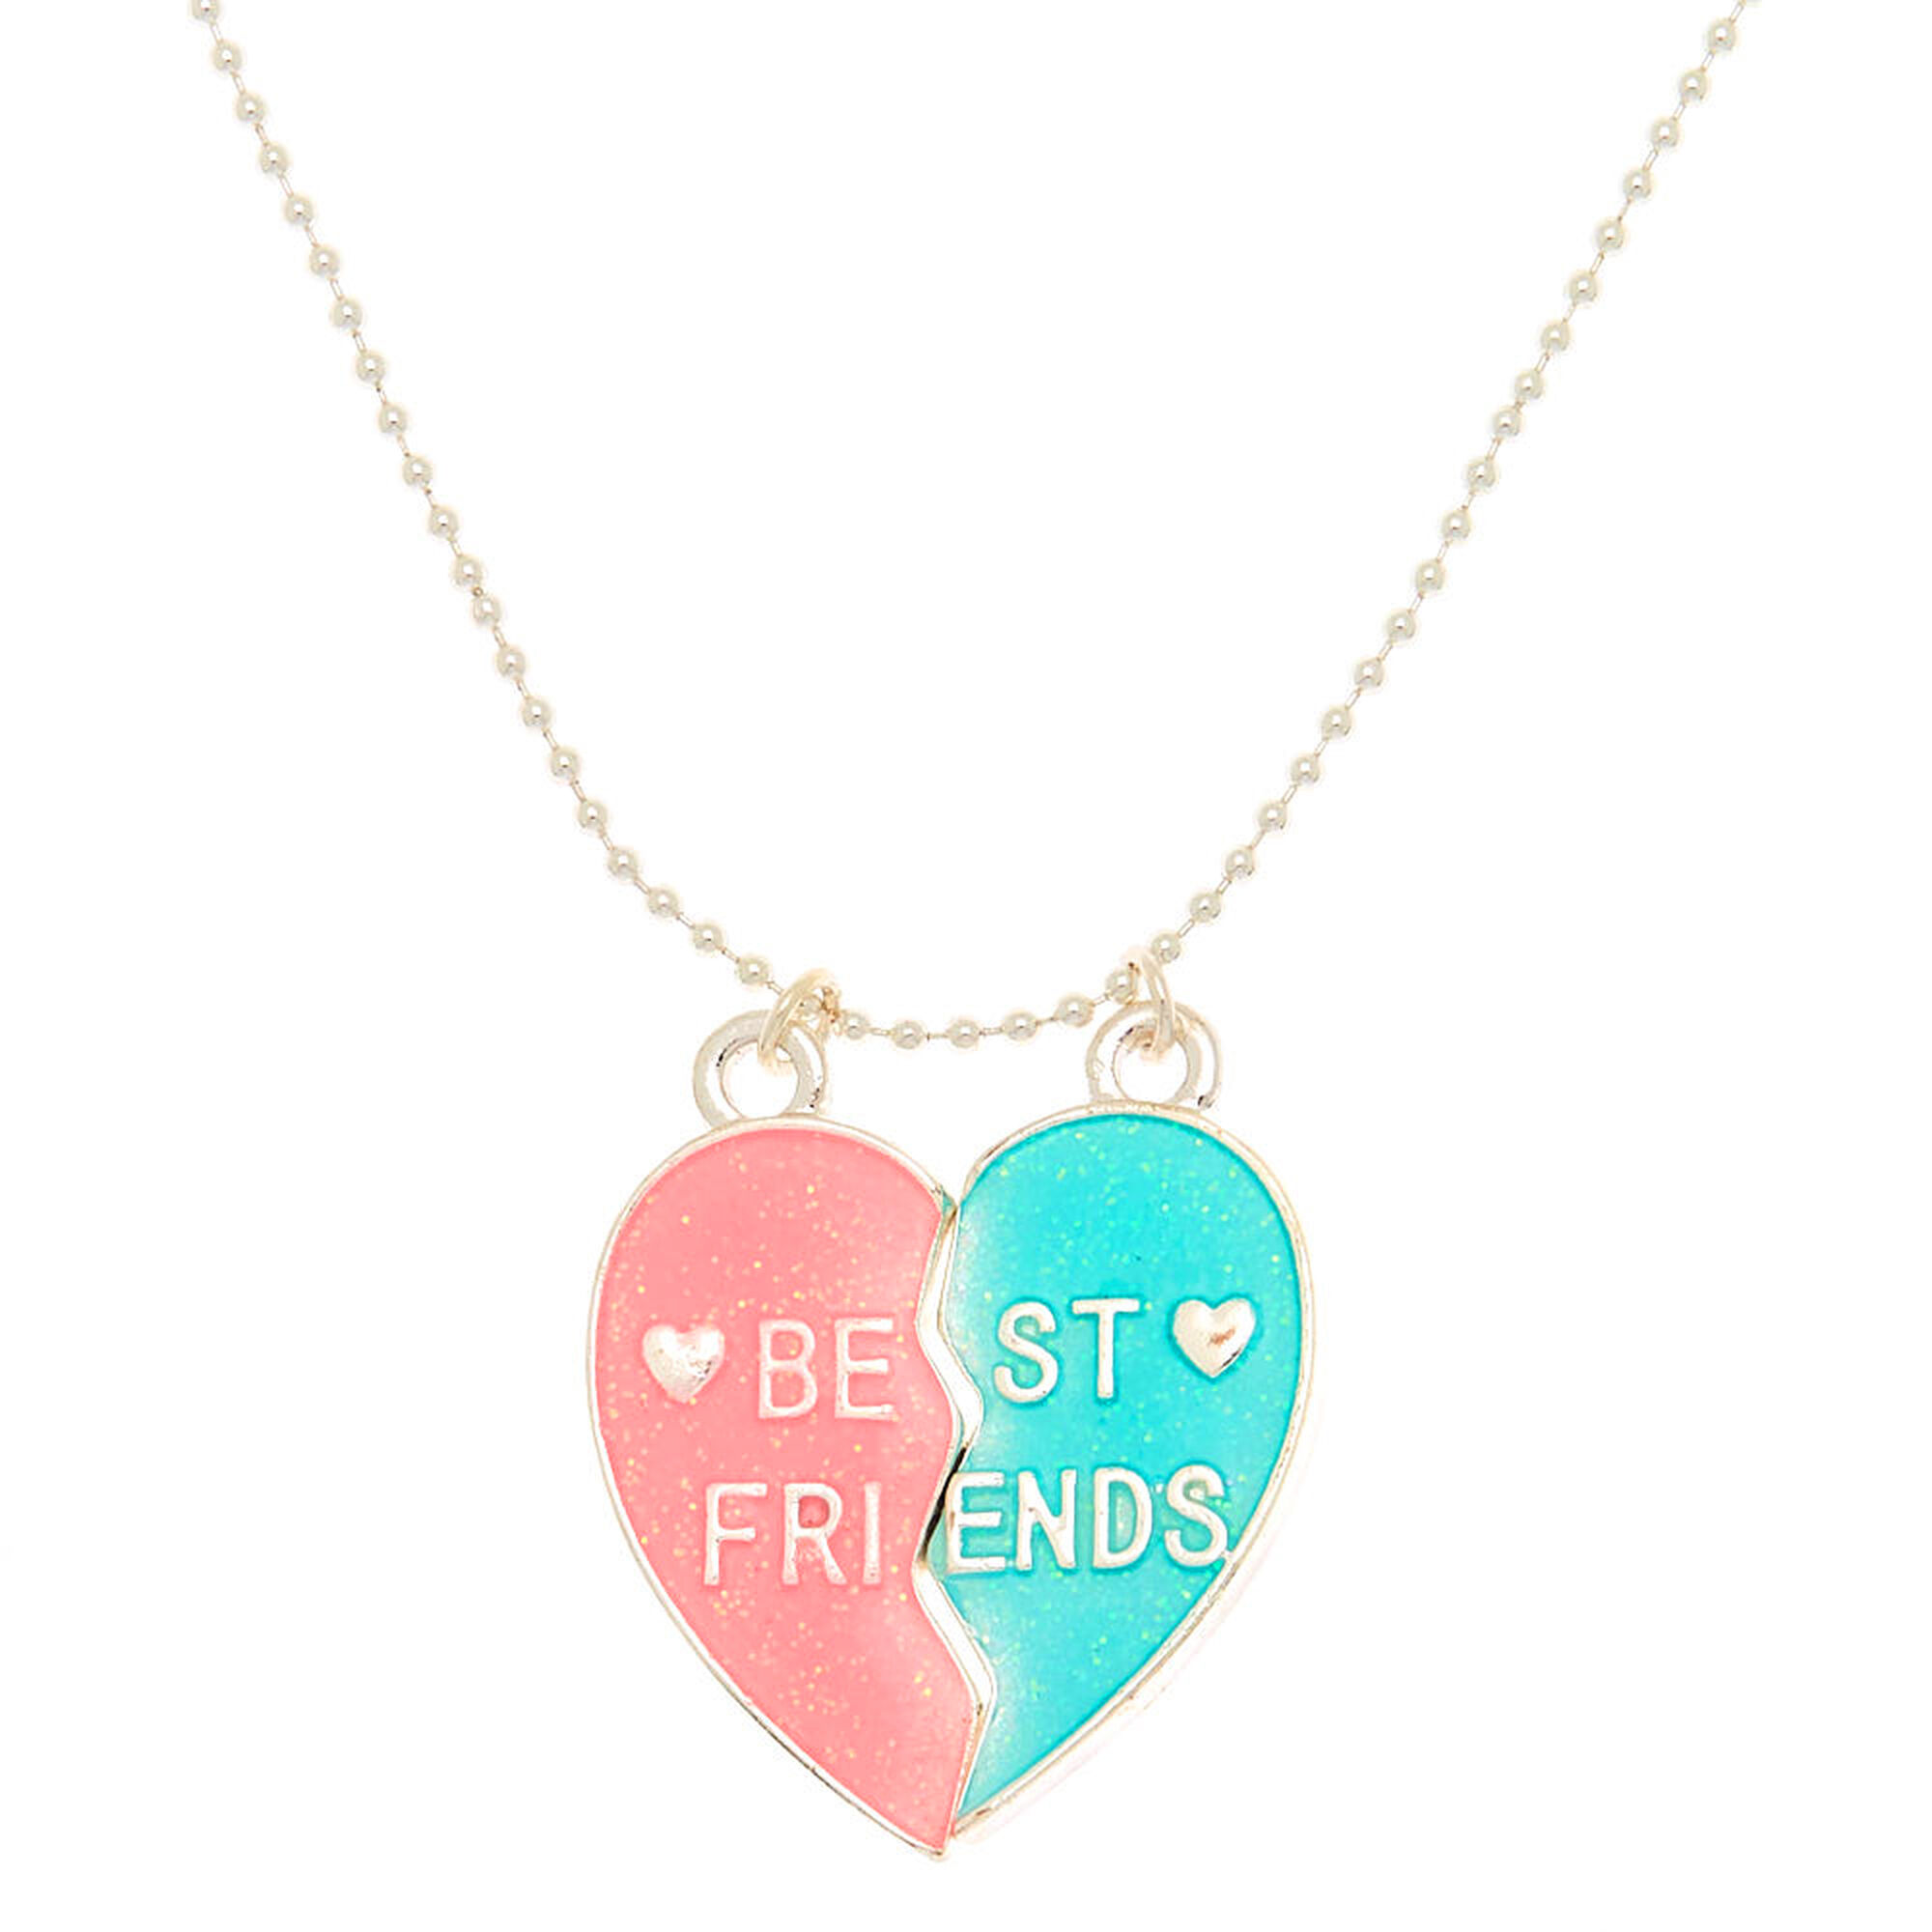 View Claires Best Friends Glow In The Dark Heart Pendant Necklaces 2 Pack Pink information